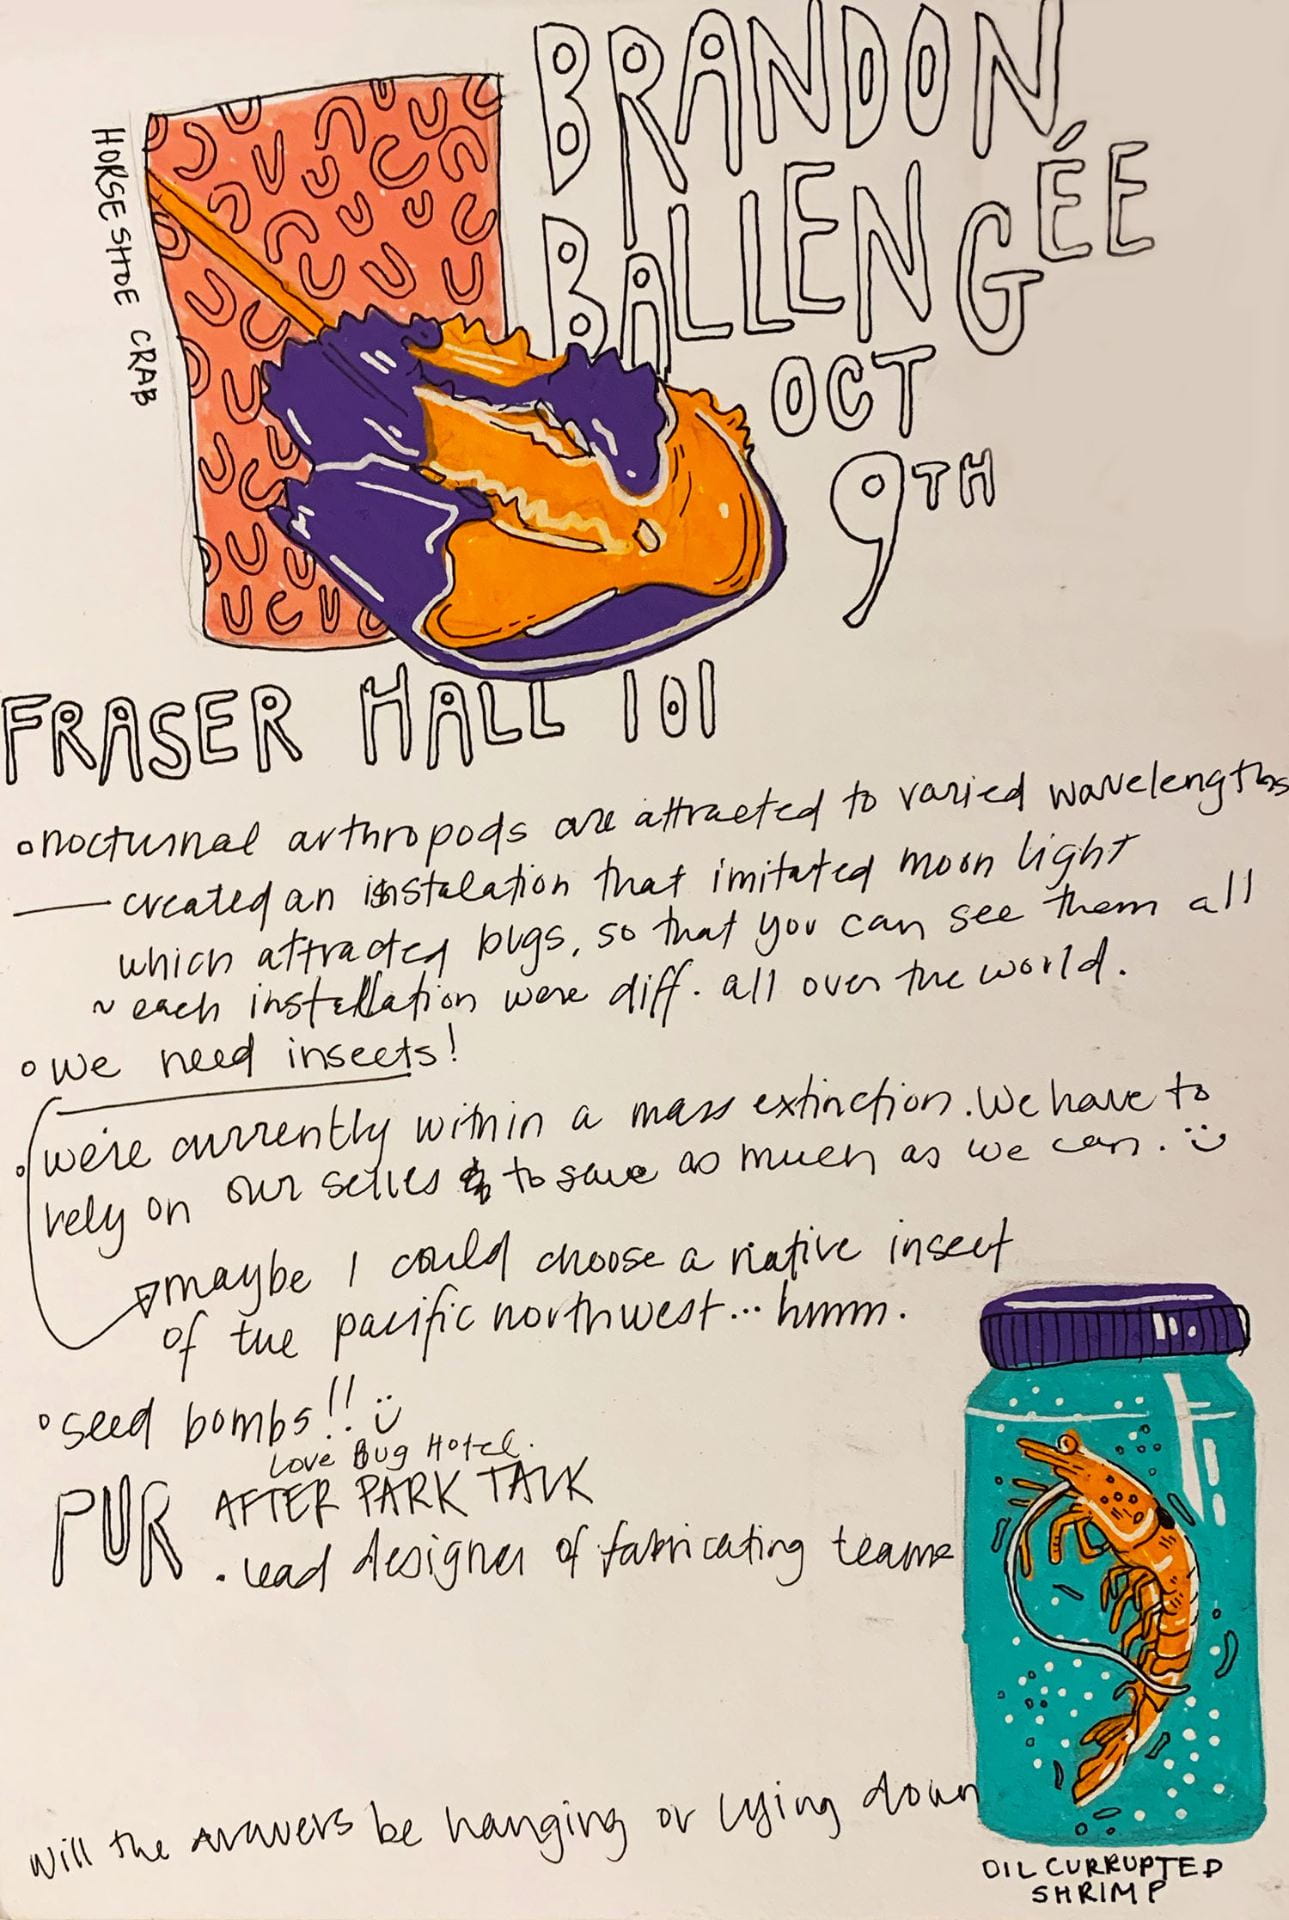 A page of notes titled Brandon Ballengee Oct 9th Fraser Hall 101, with colorful ink illustrations of a horseshoe crab and an oil corrupted shrimp in a jar